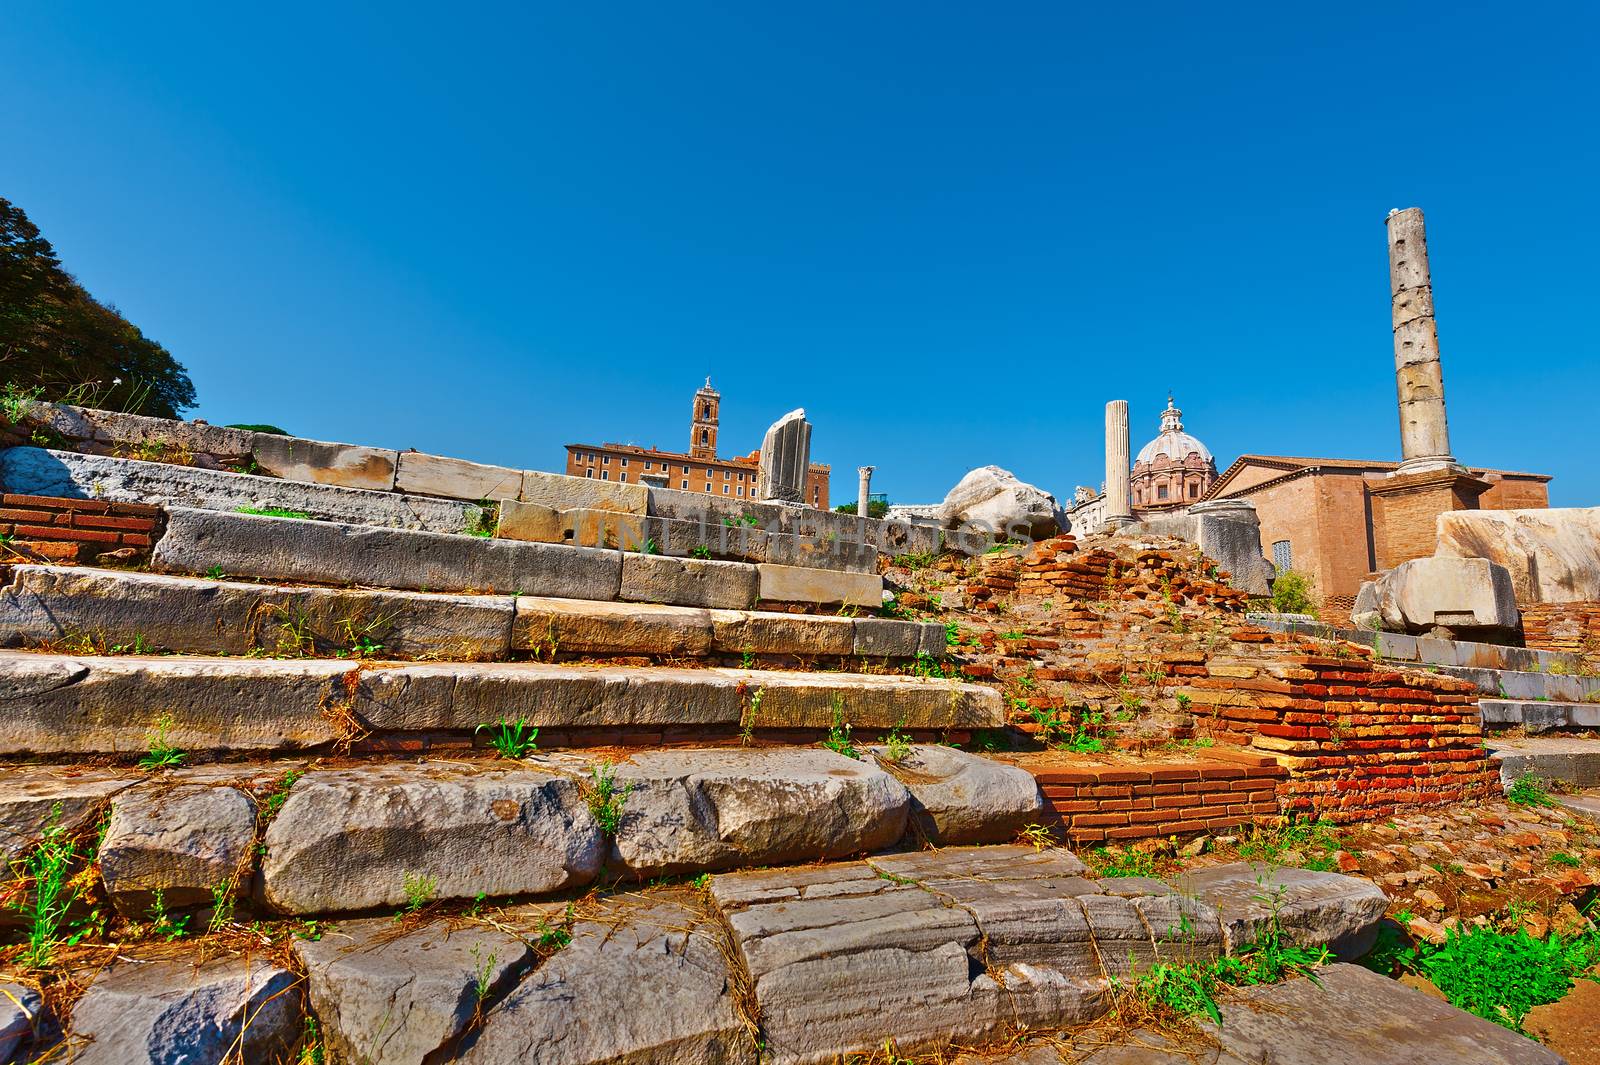 View of the Antique Ruins of Rome